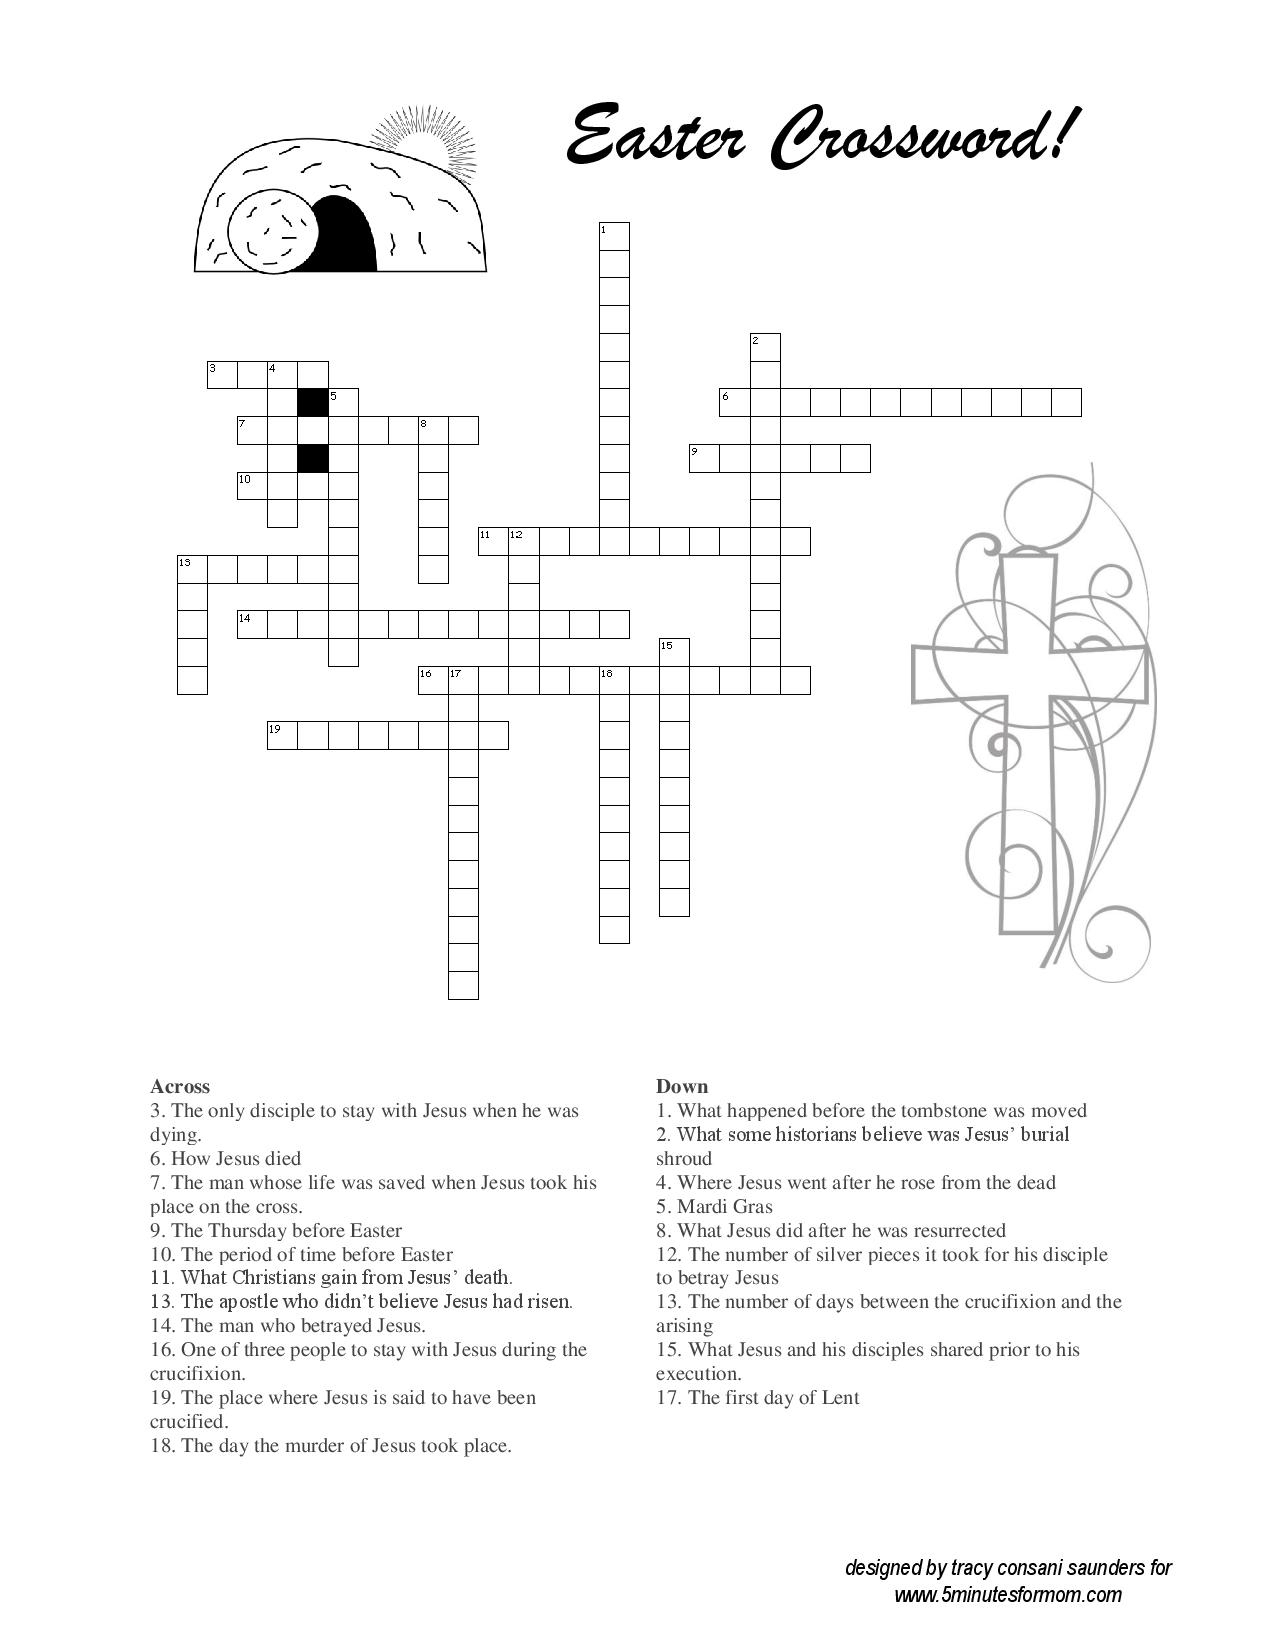 Free Easter Printables For Kids - Coloring Sheets And Crosswords - 5 - Free Easter Crossword Puzzles Printable